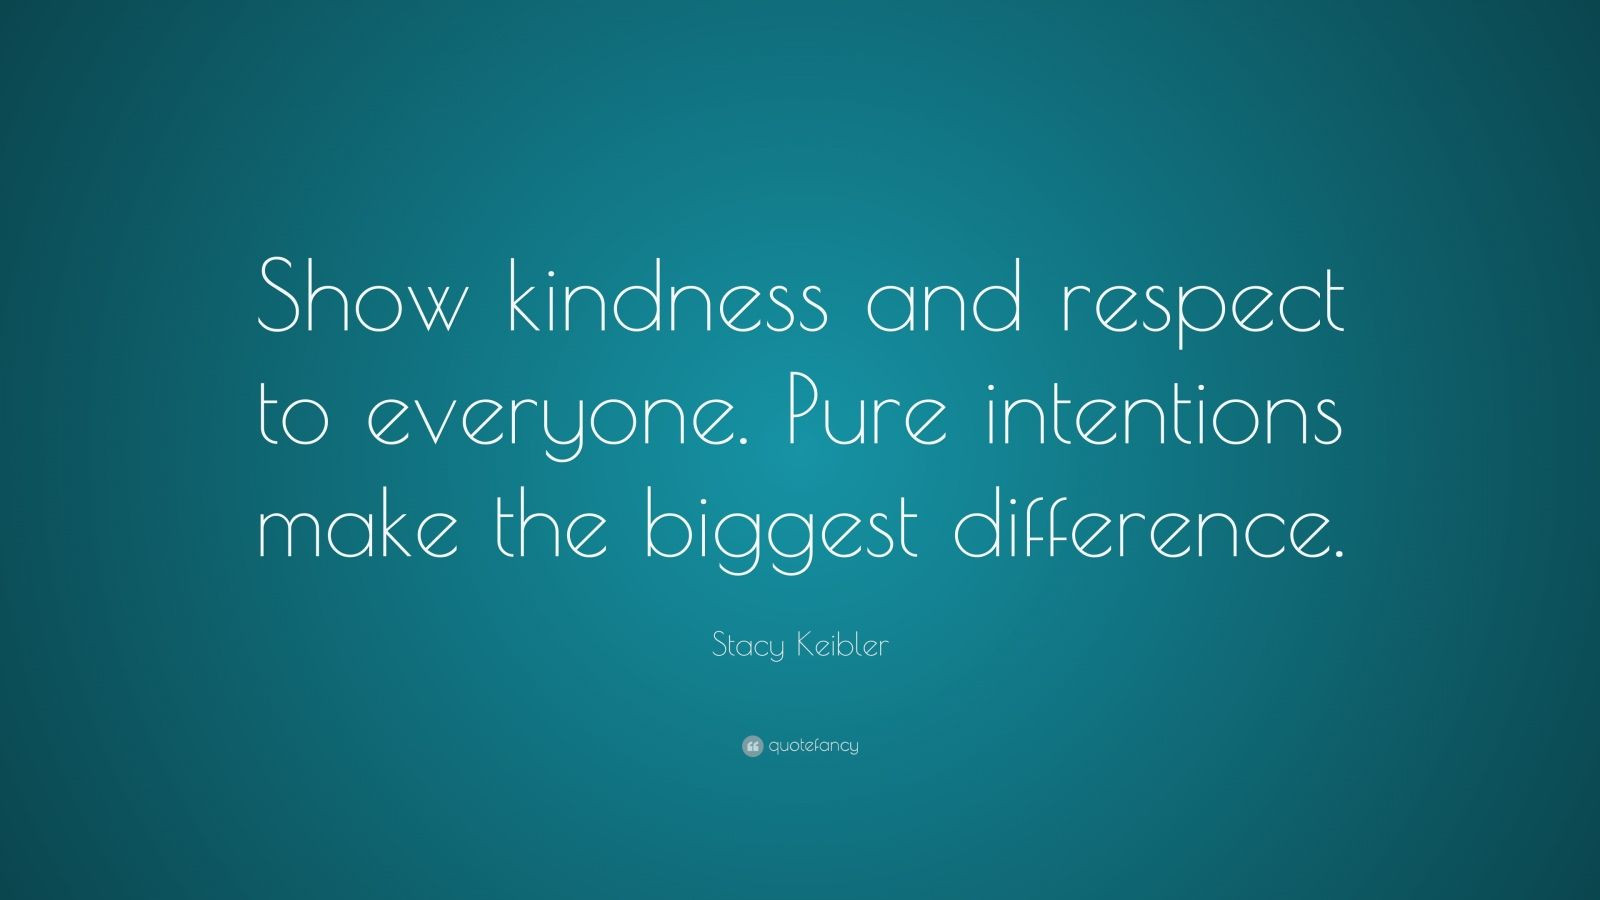 Kindness And Respect Quotes
 Stacy Keibler Quote “Show kindness and respect to